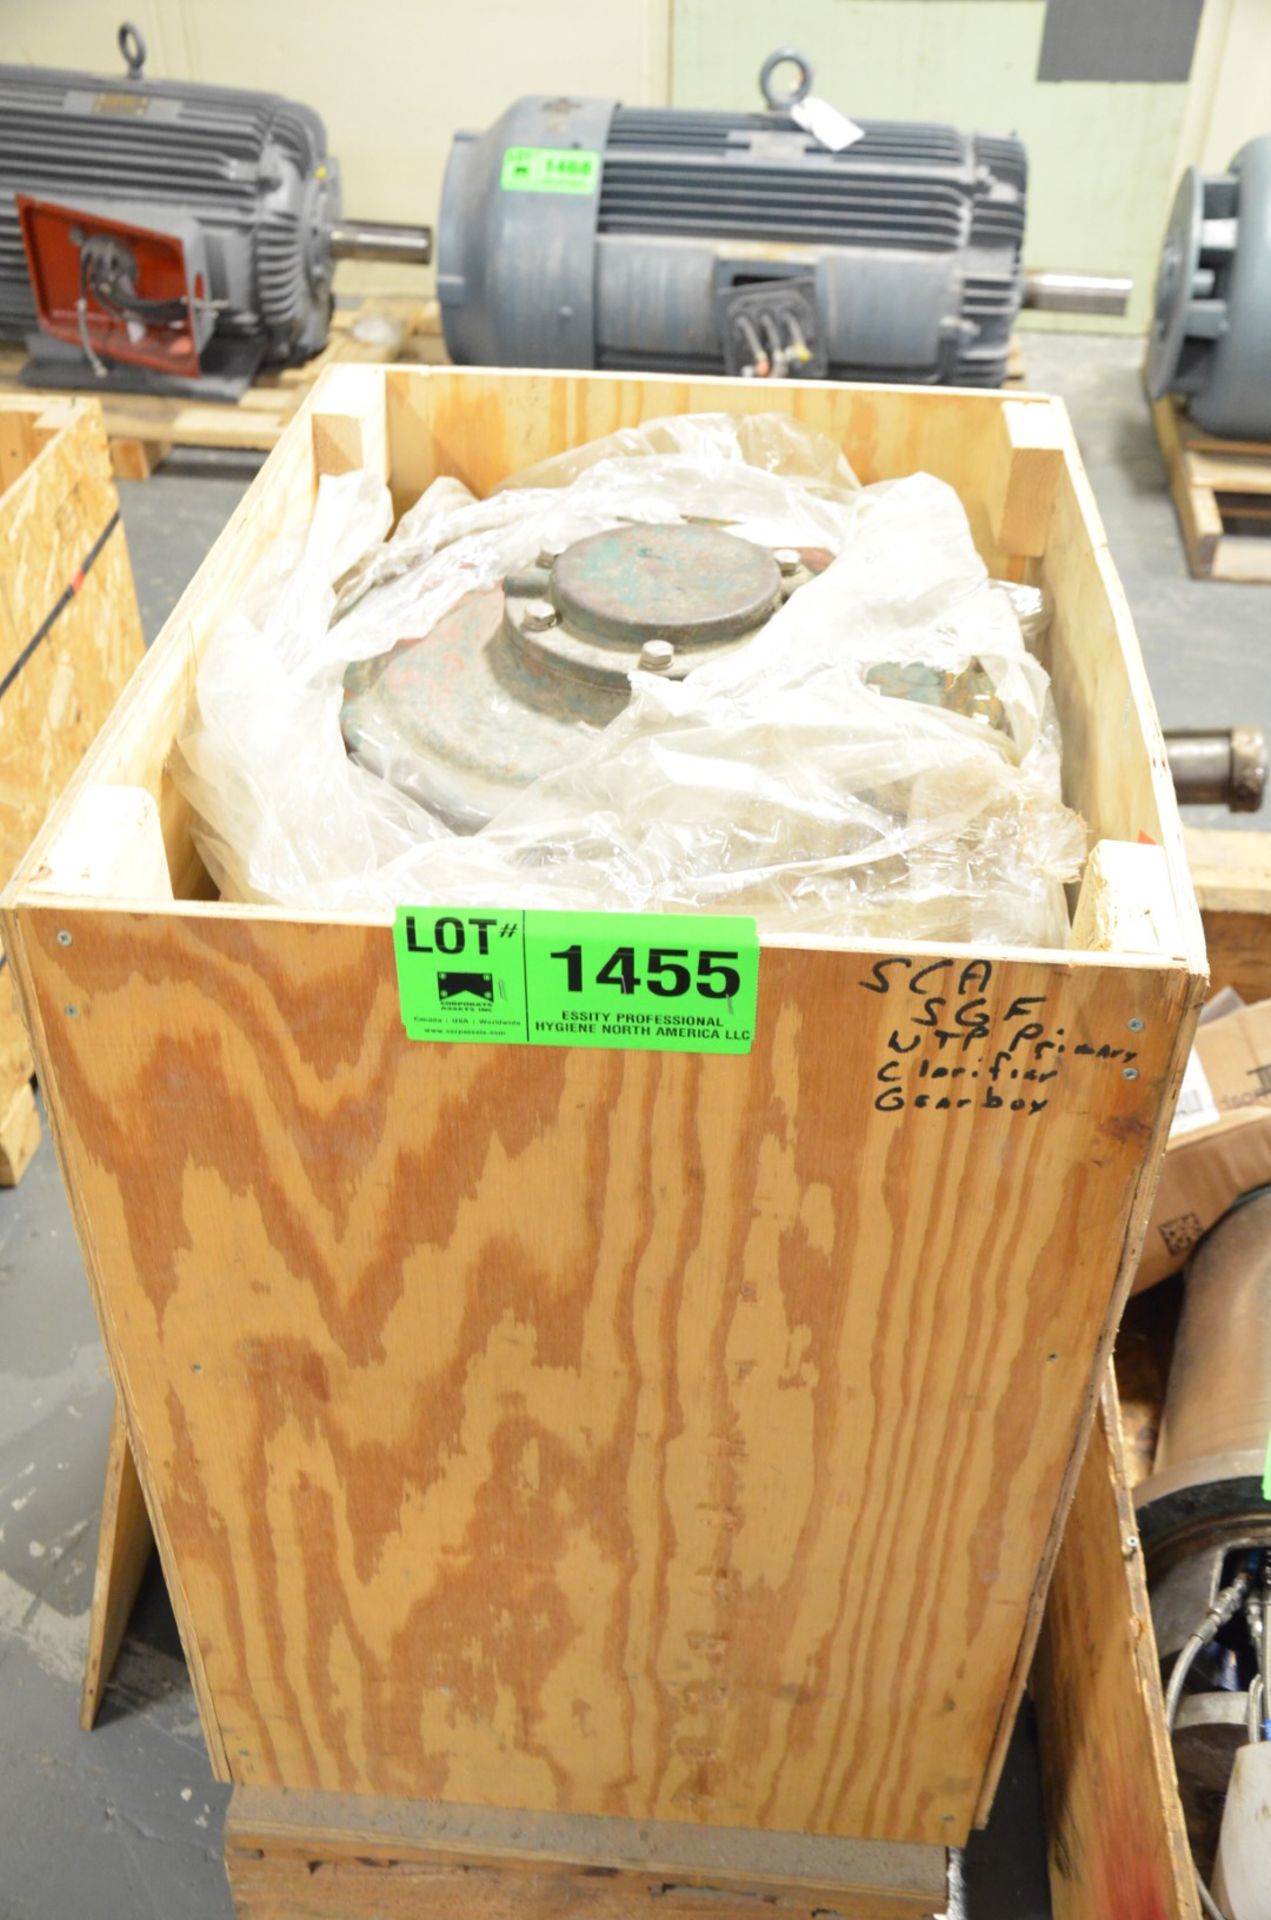 LIGHTNIN VERTICAL MIXER AGITATOR GEARBOX [RIGGING FEE FOR LOT #1455 - $25 USD PLUS APPLICABLE